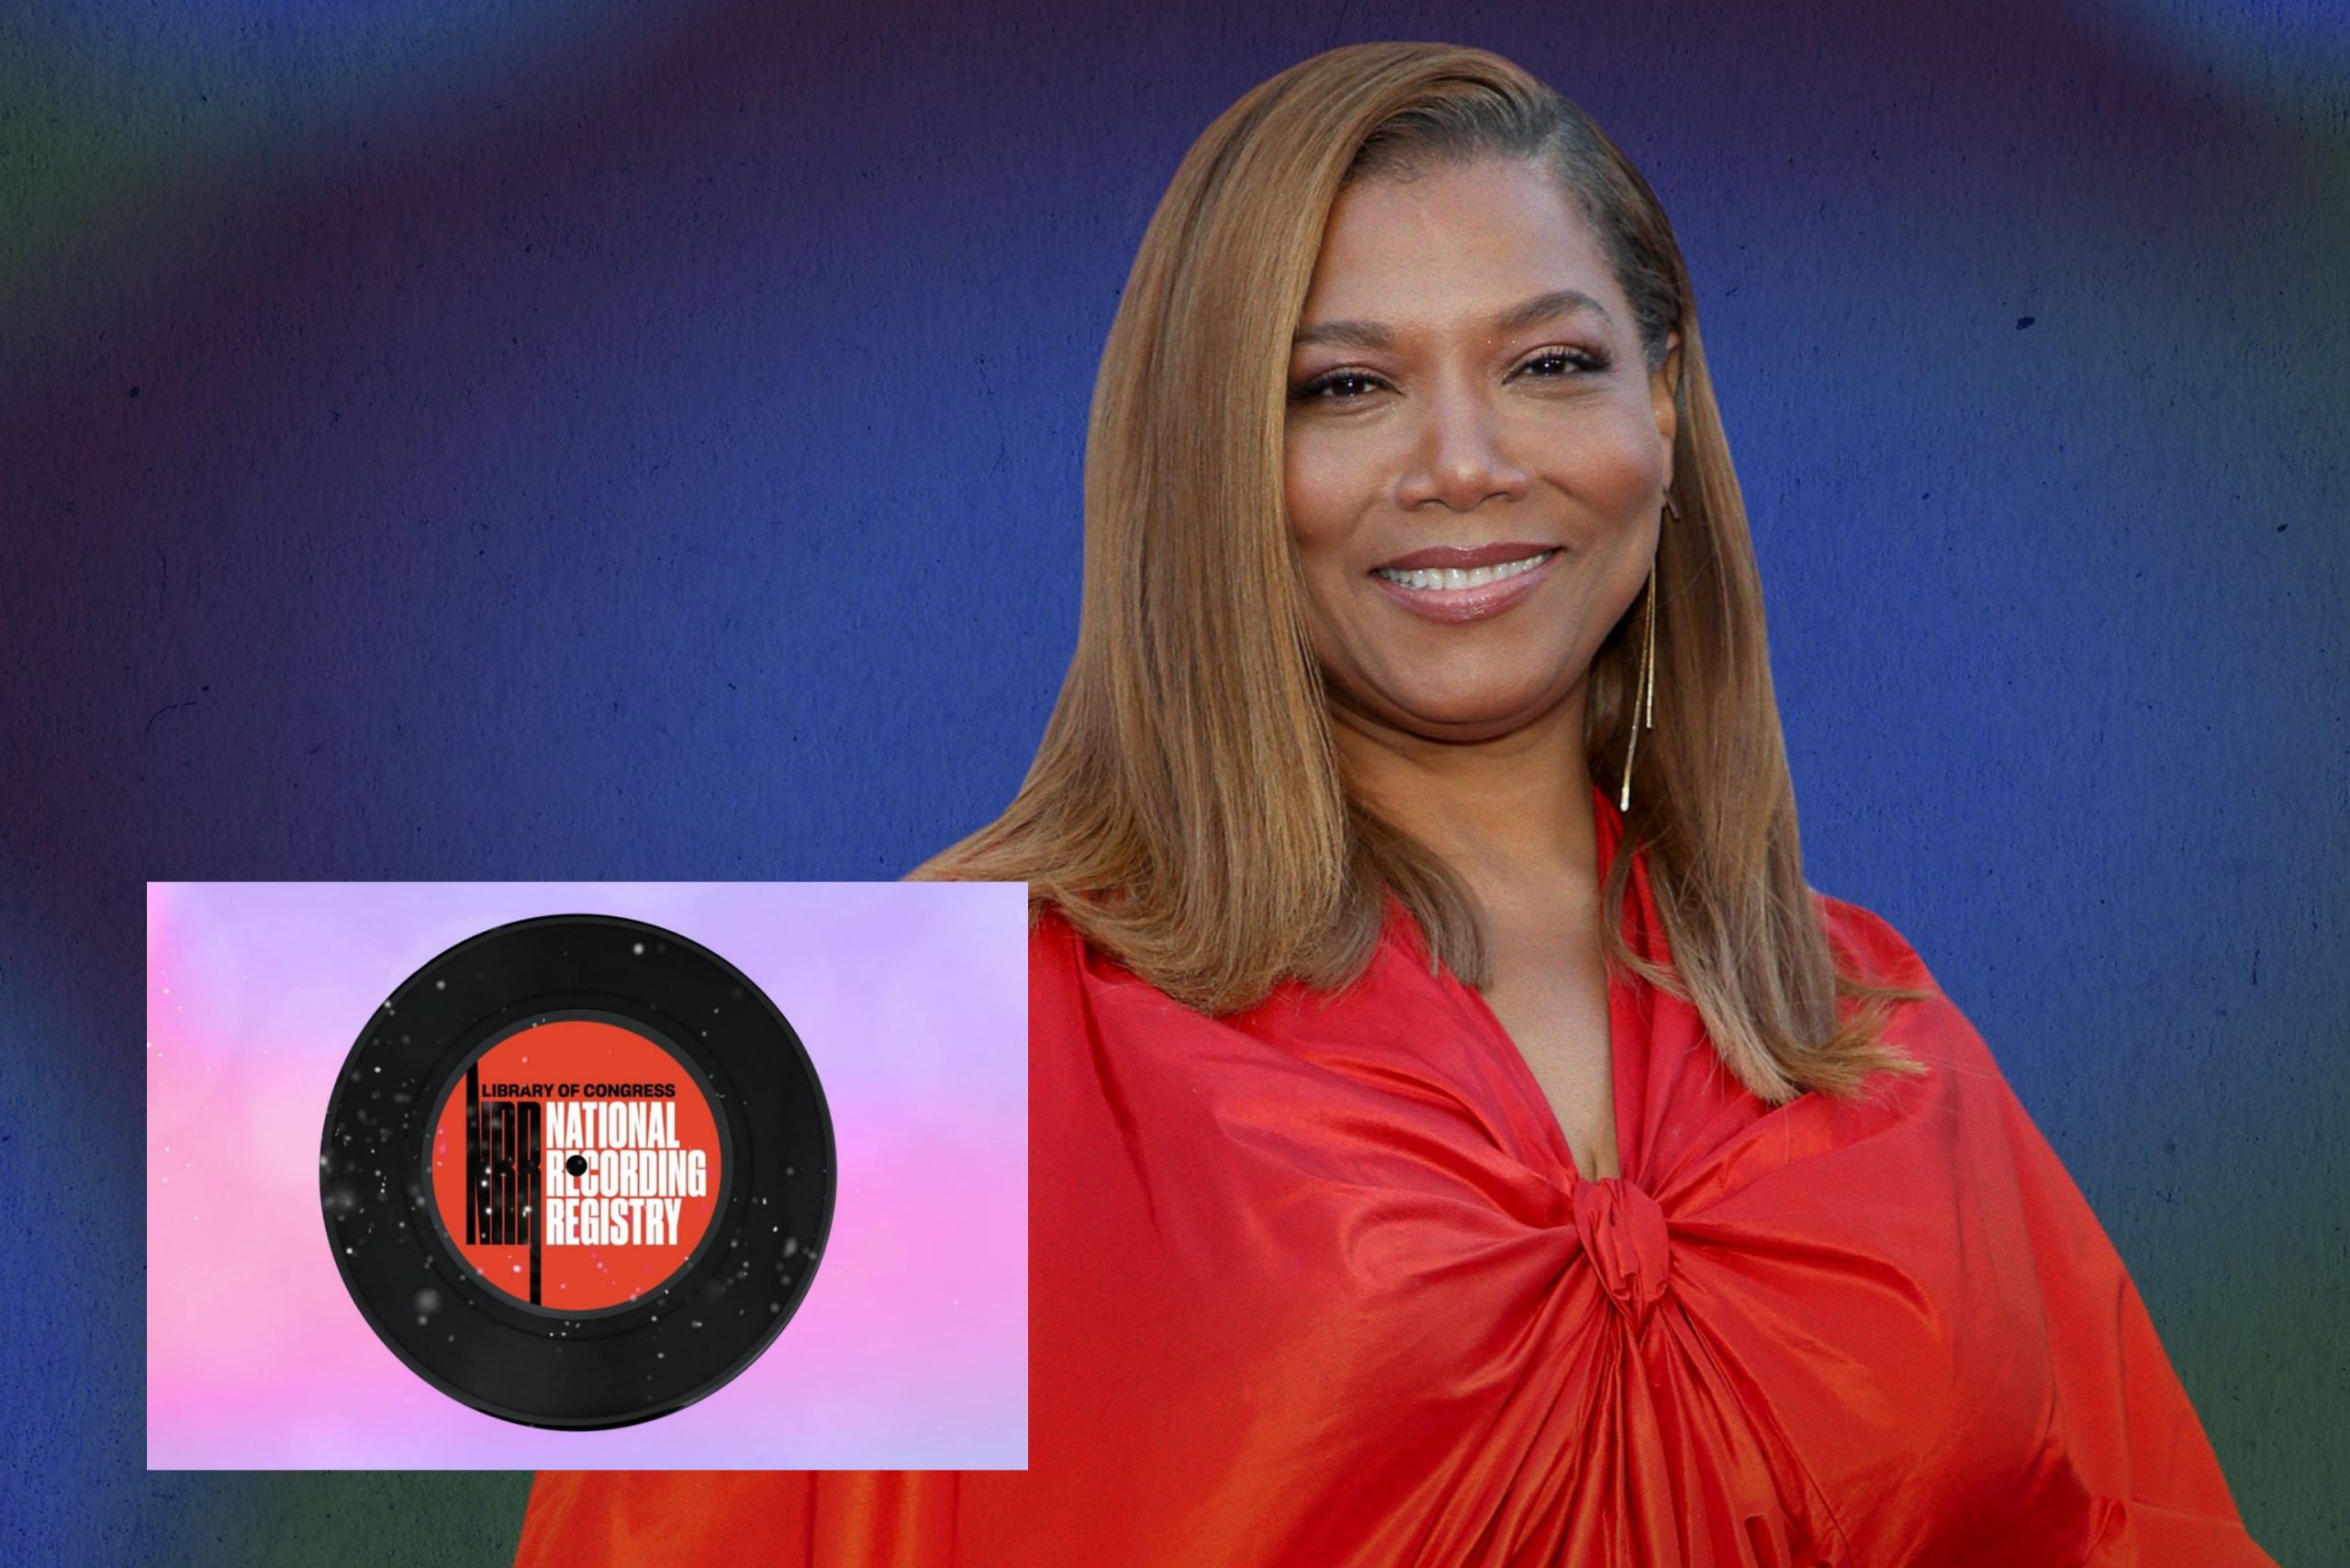 Queen Latifah Makes History As The First Female Rapper Selected For The National Recording Registry